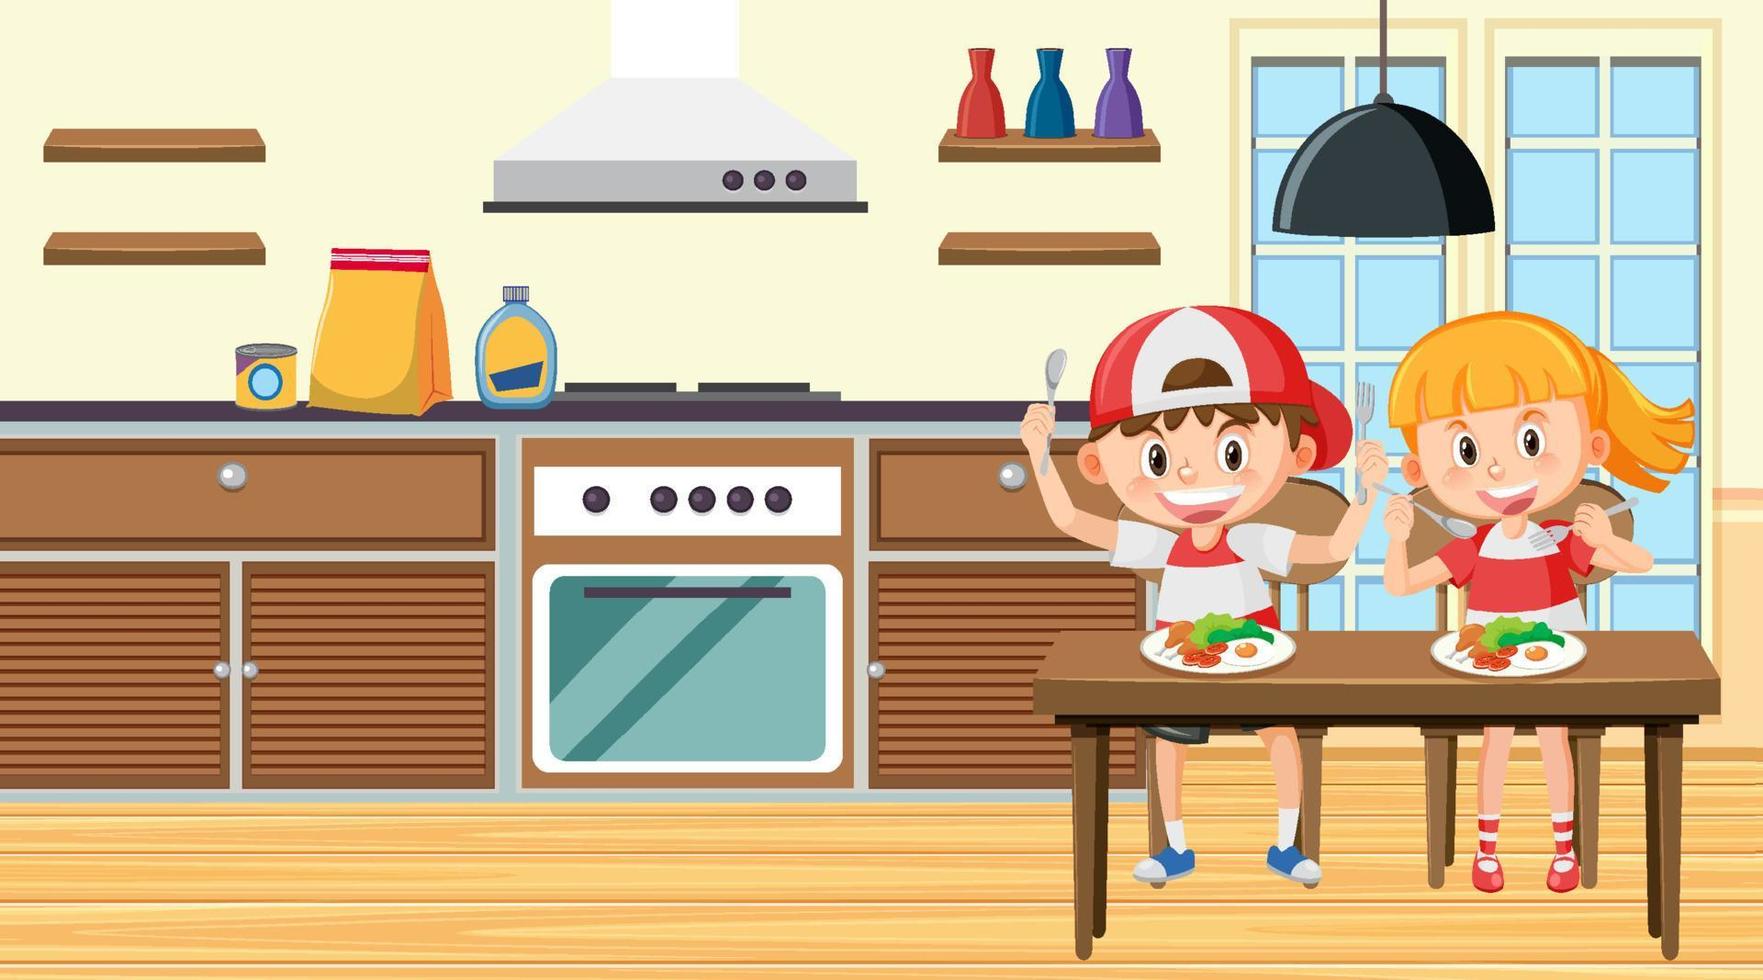 Boy and girl having breakfast in the kitchen vector